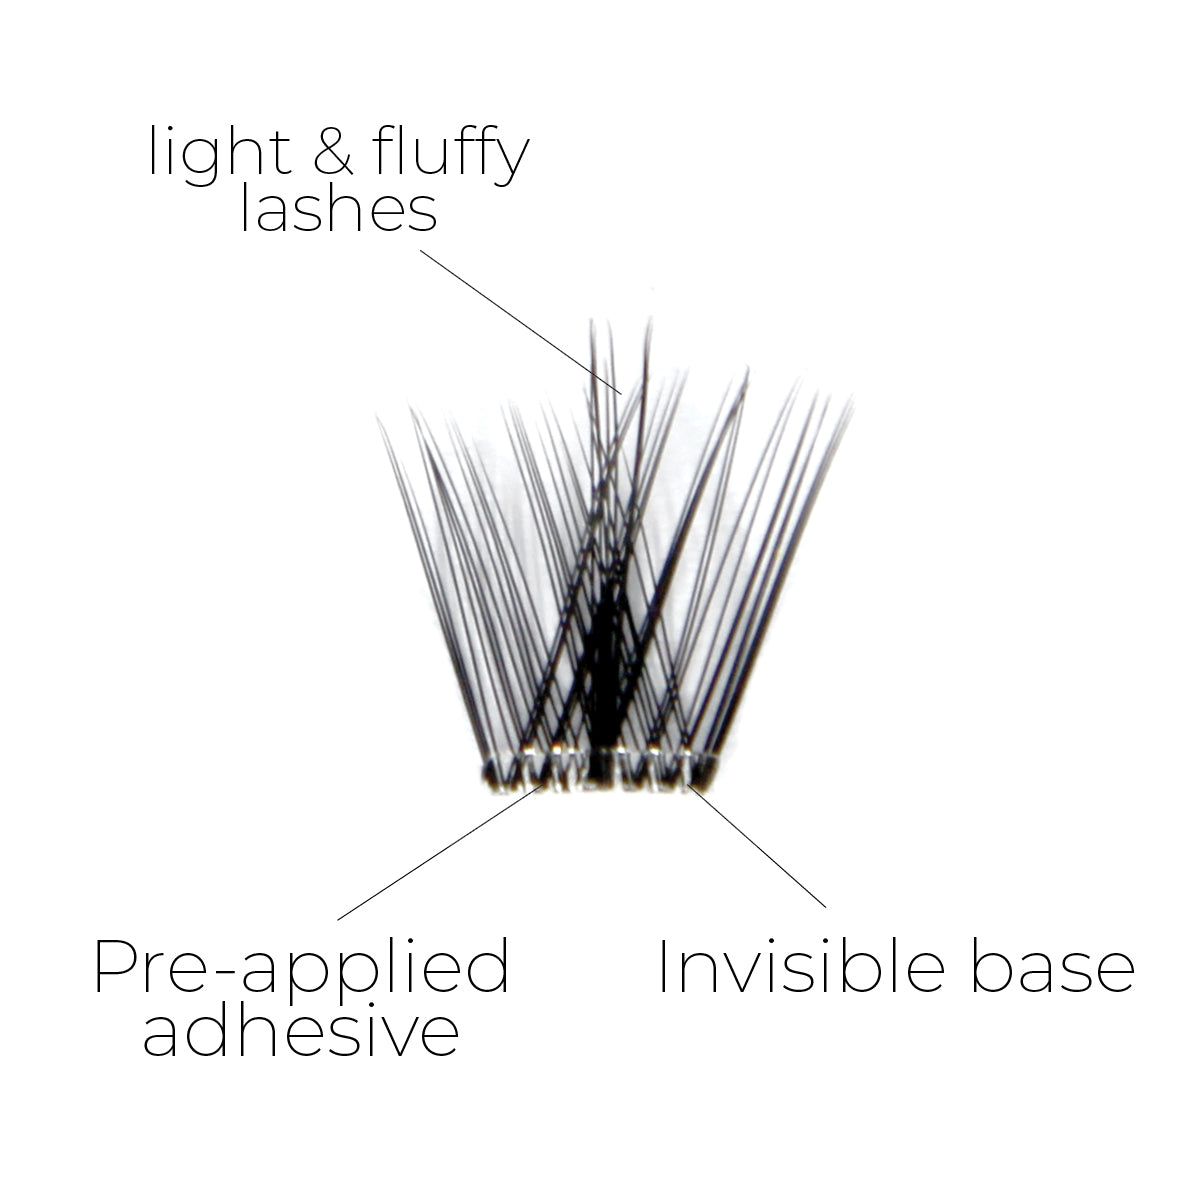 Miss Wispy Cluster Lashes - No Glue - 30 Clusters . - One V Salon